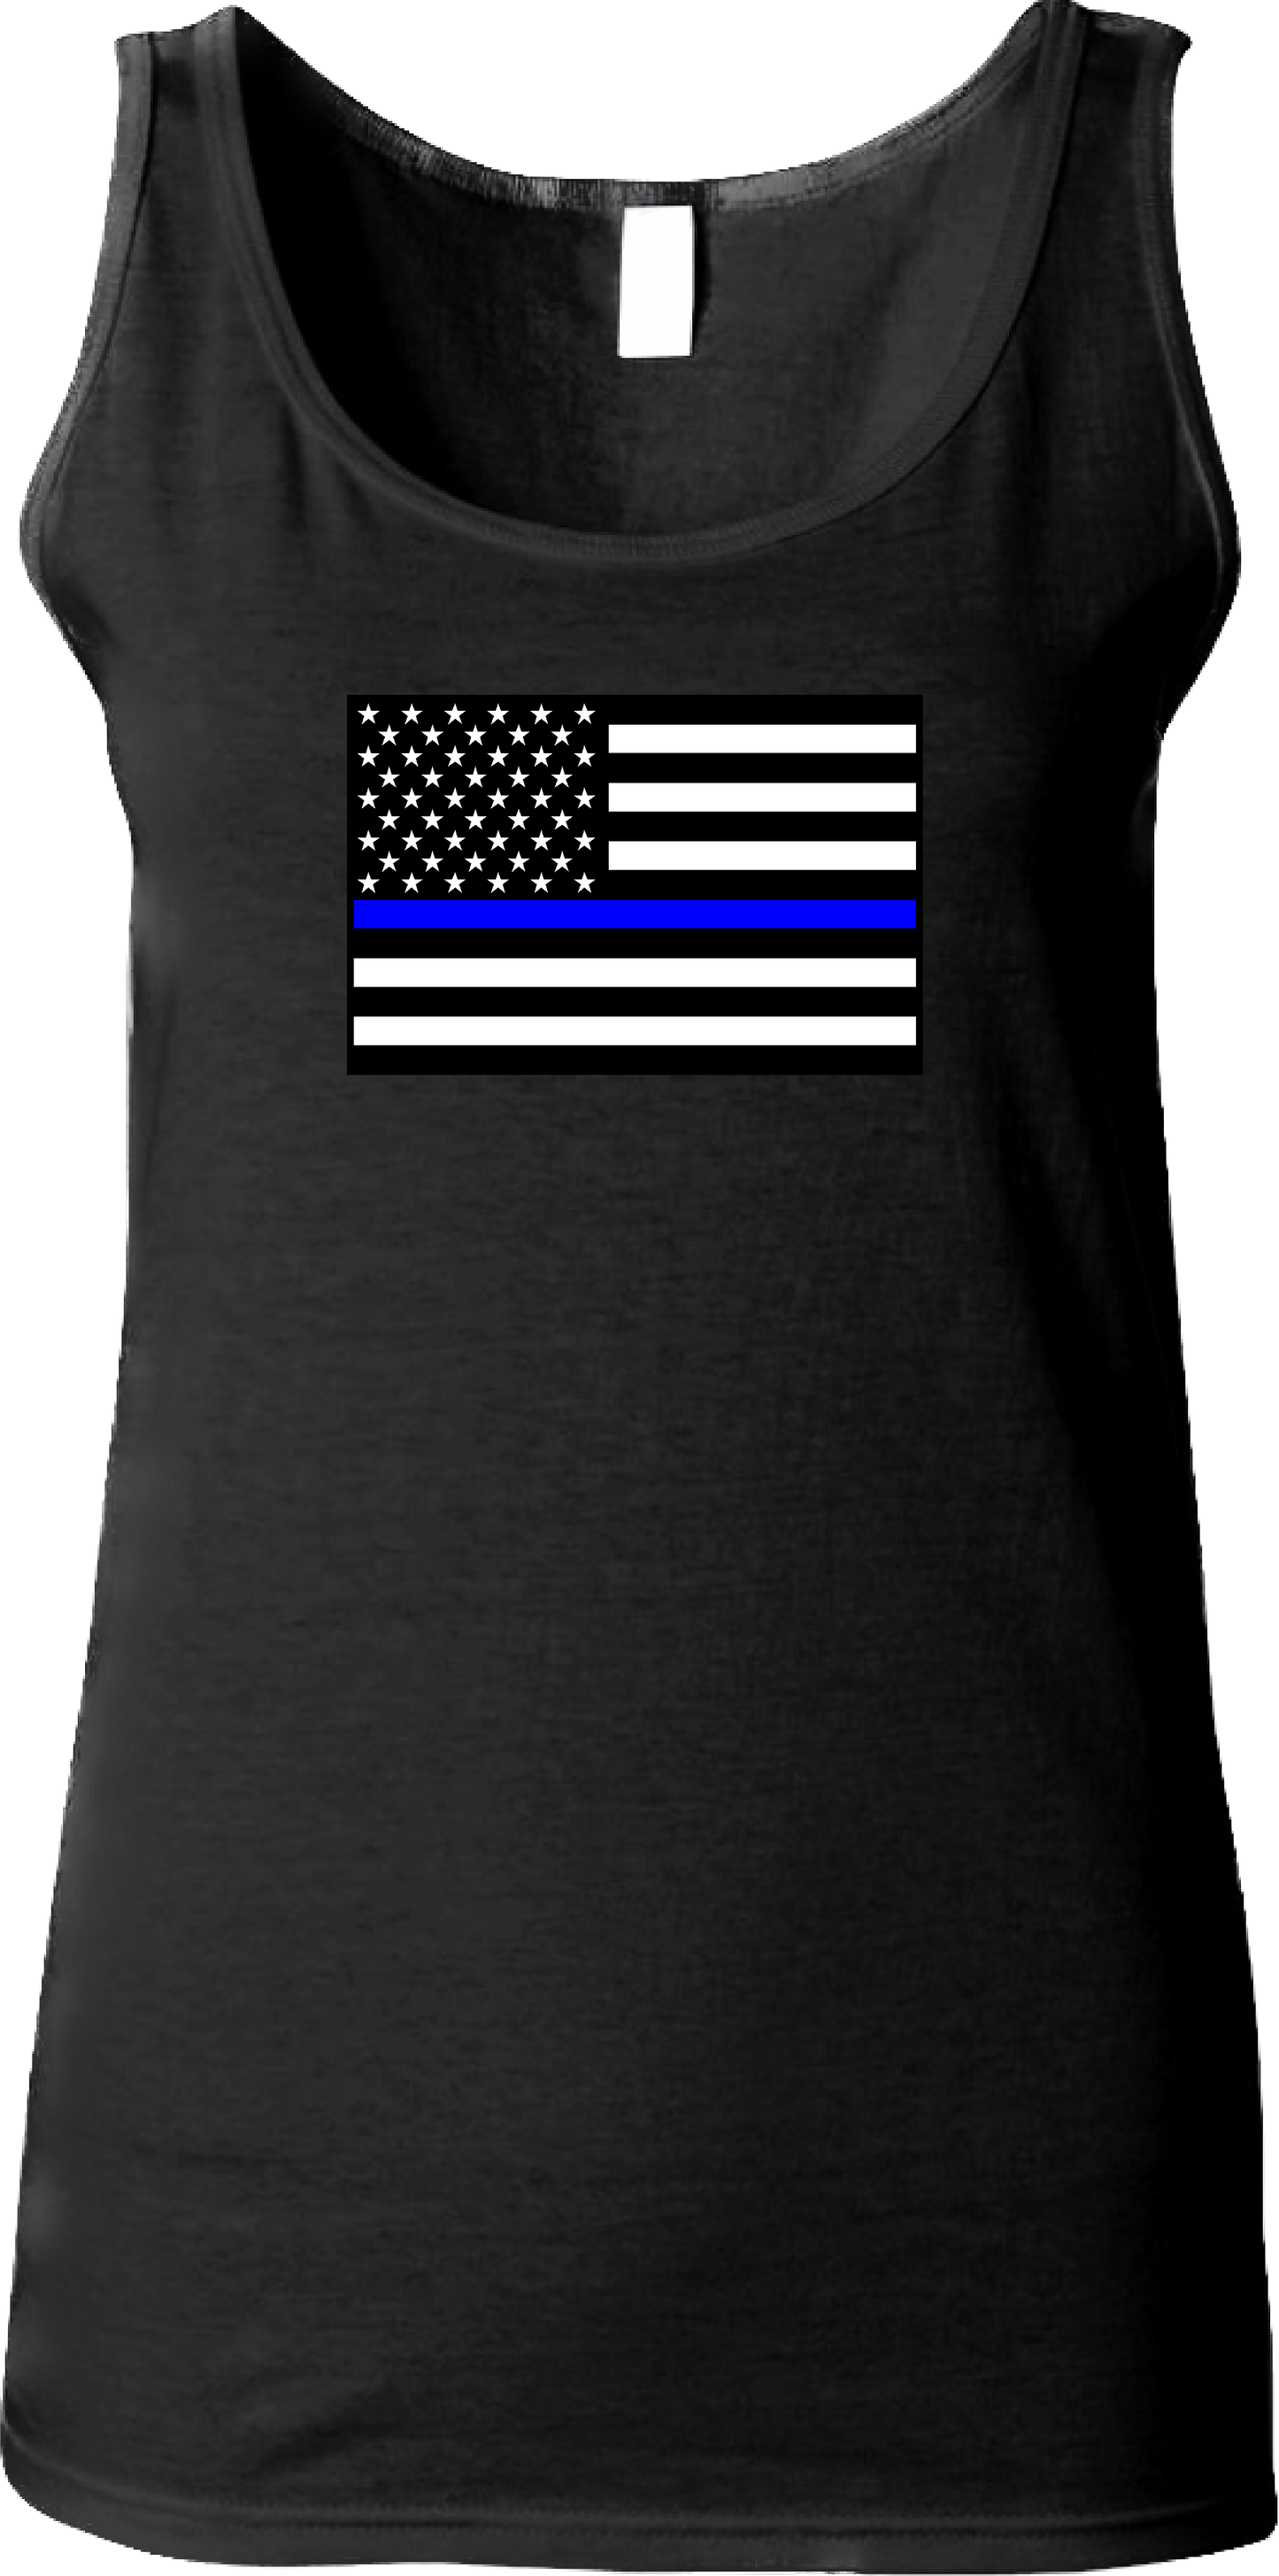 Women’s Thin Blue Line United States Flag Tank Top